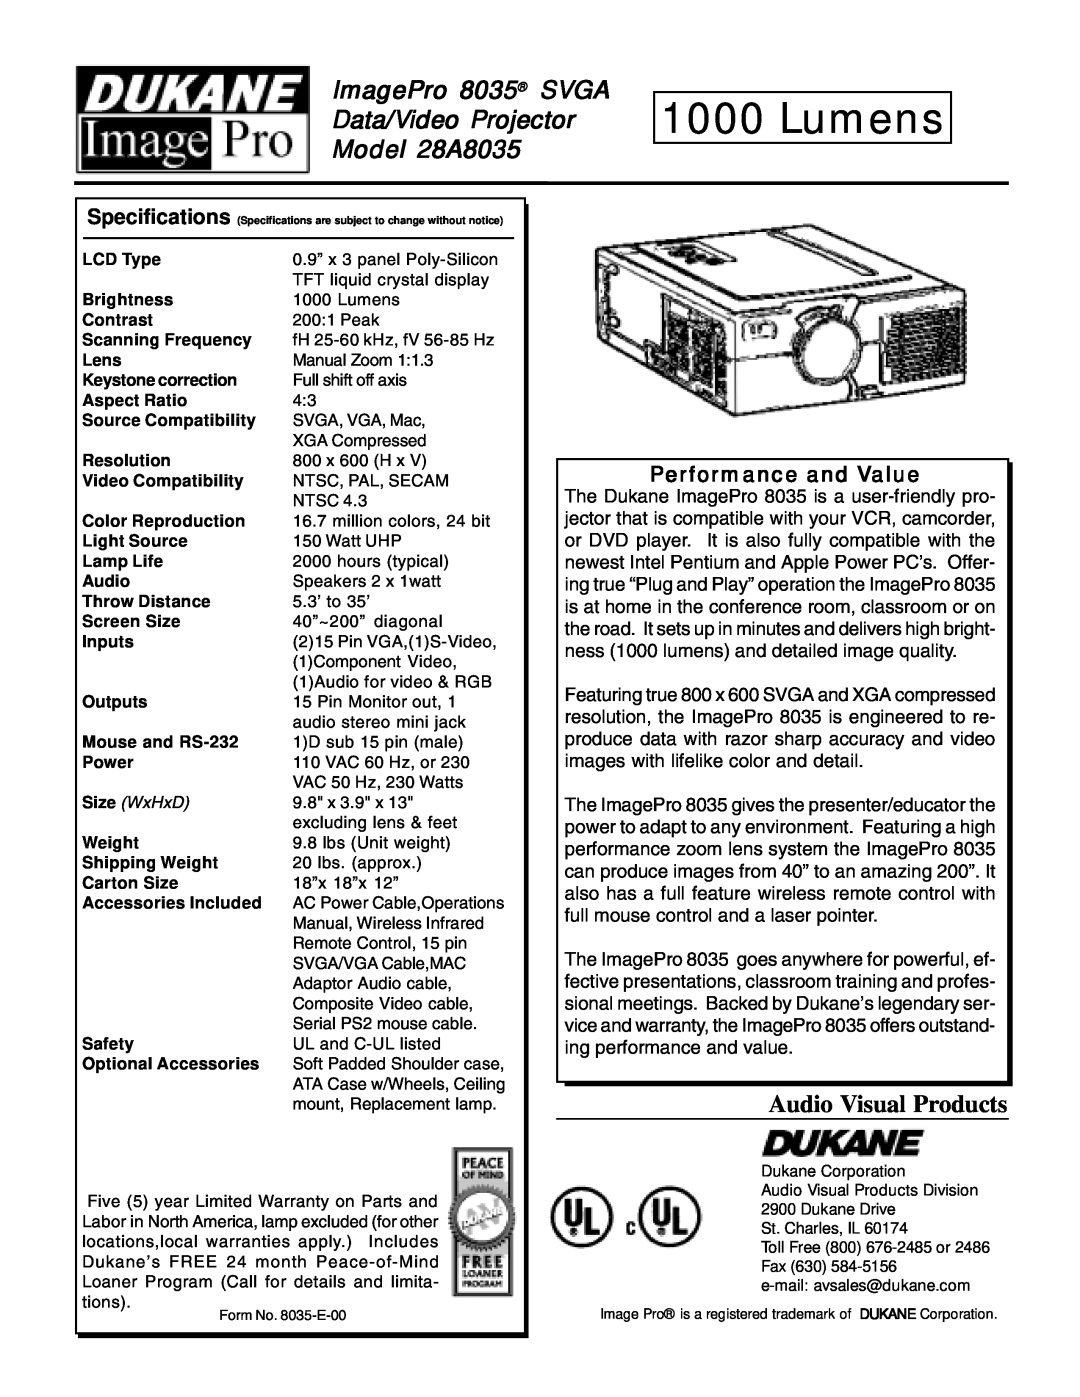 Dukane Lumens, ImagePro 8035 SVGA Data/Video Projector Model 28A8035, Audio Visual Products, Performance and Value 